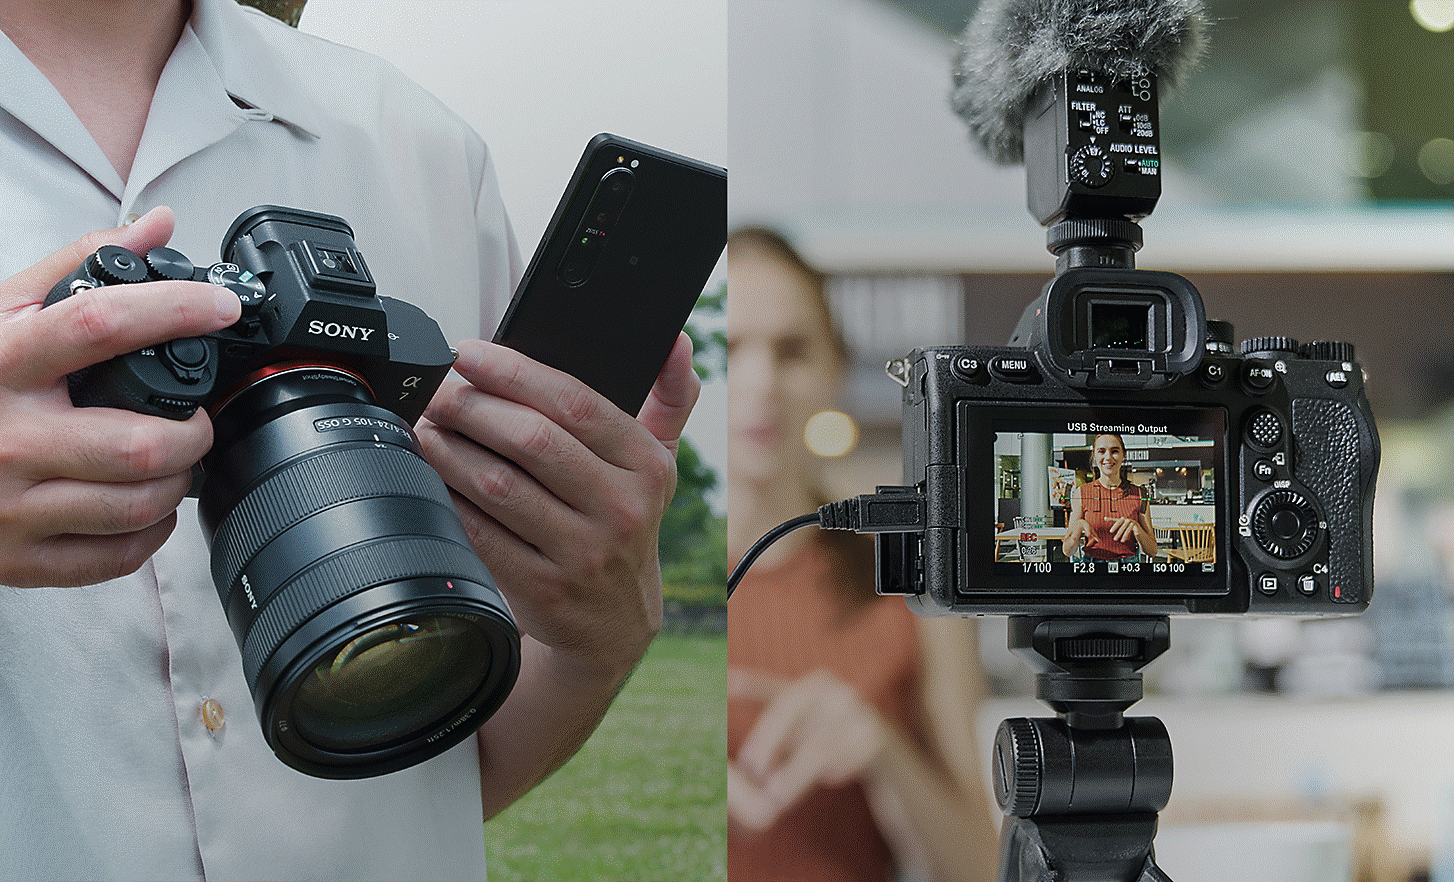 Left: photo of a person holding the Alpha 7 IV and a smartphone in order to share still photos or movies immediately after shooting; Right: photo of a person live-streaming with the Alpha 7 IV